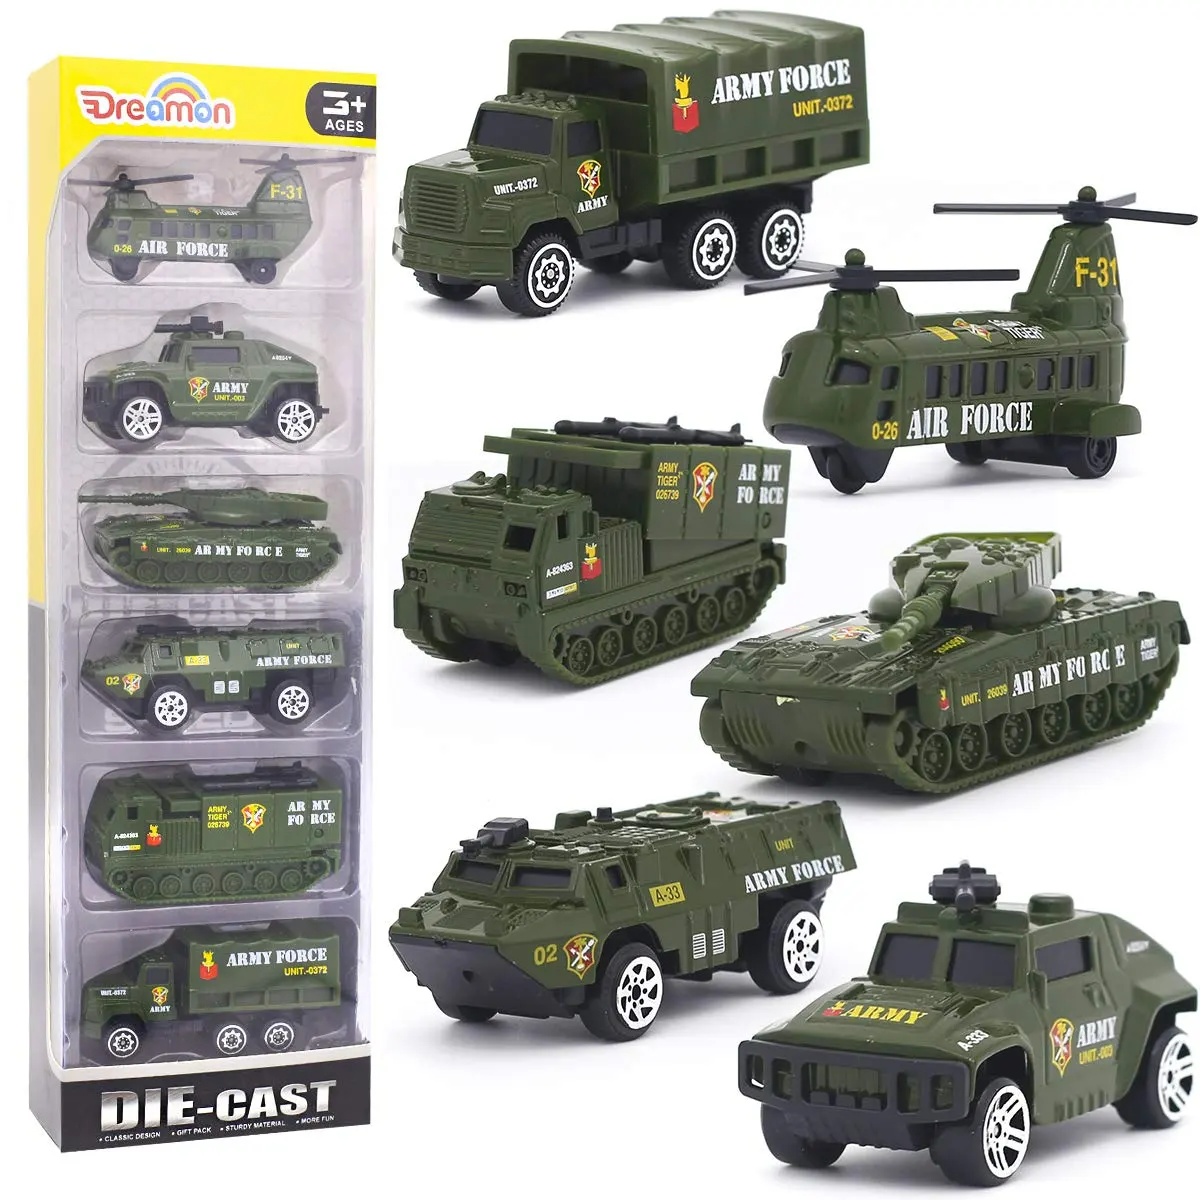 Kids Alloy Military Truck and Tanks Set Models Play Vehicles Toy Dicast Cars Toys 6Pcs Set